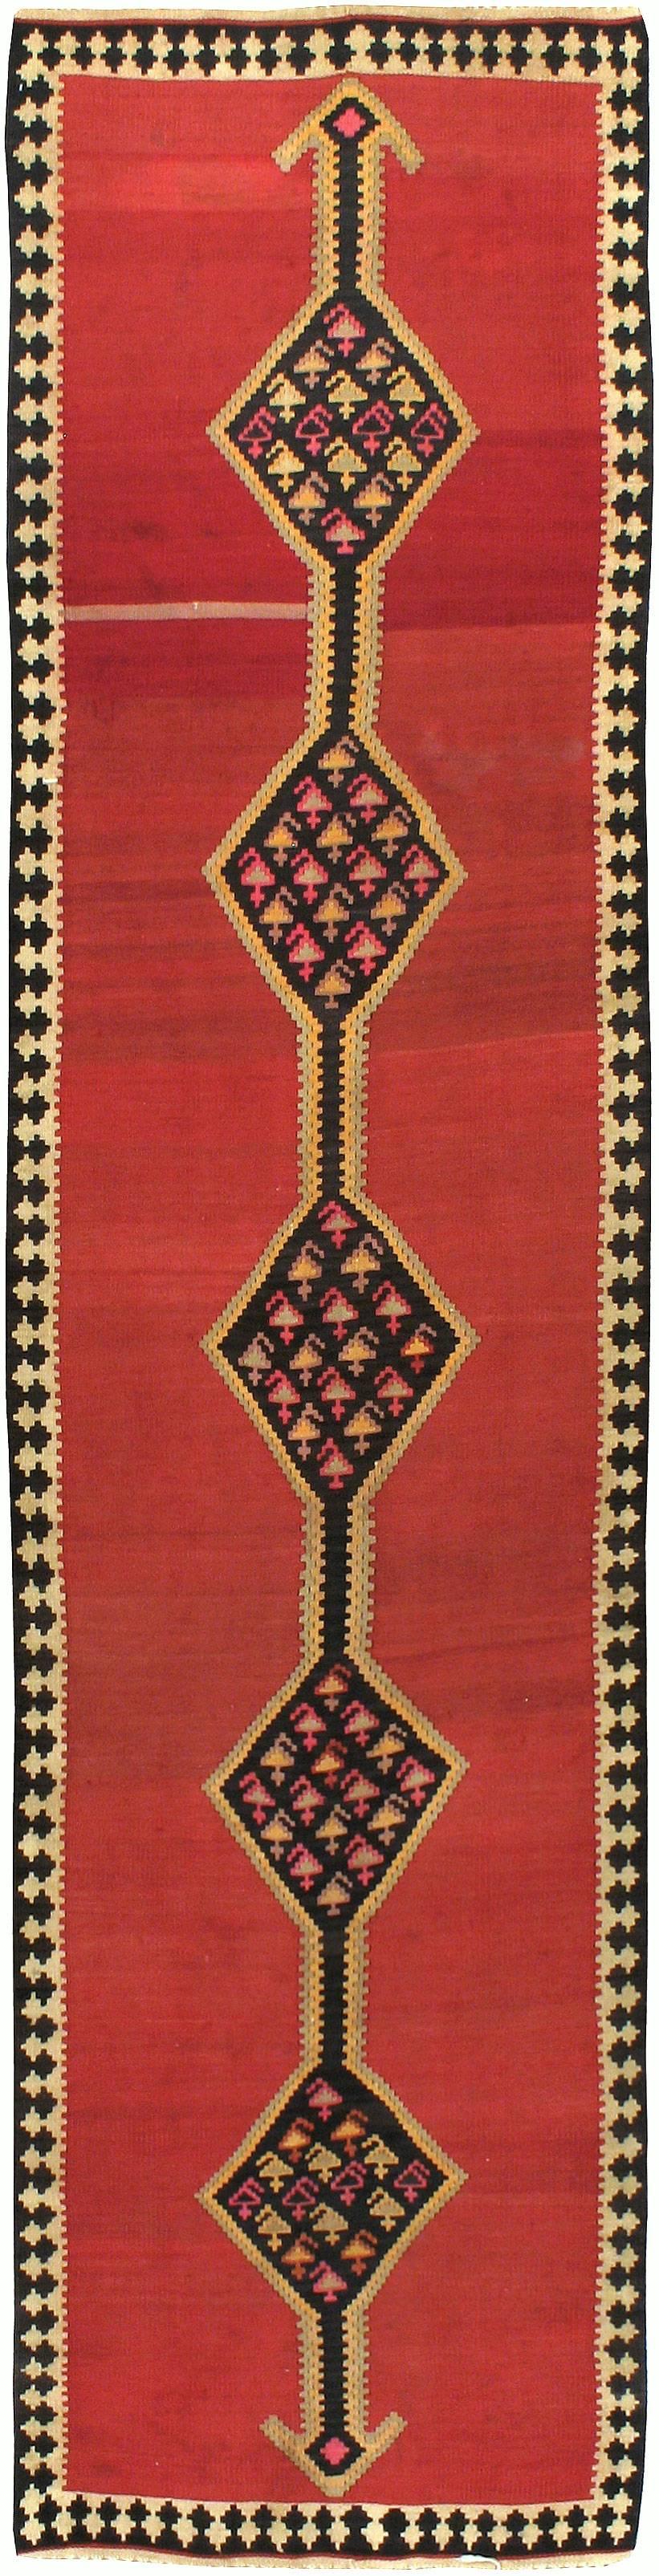 A vintage Turkish Kilim flat-weave from the second quarter of the 20th century.